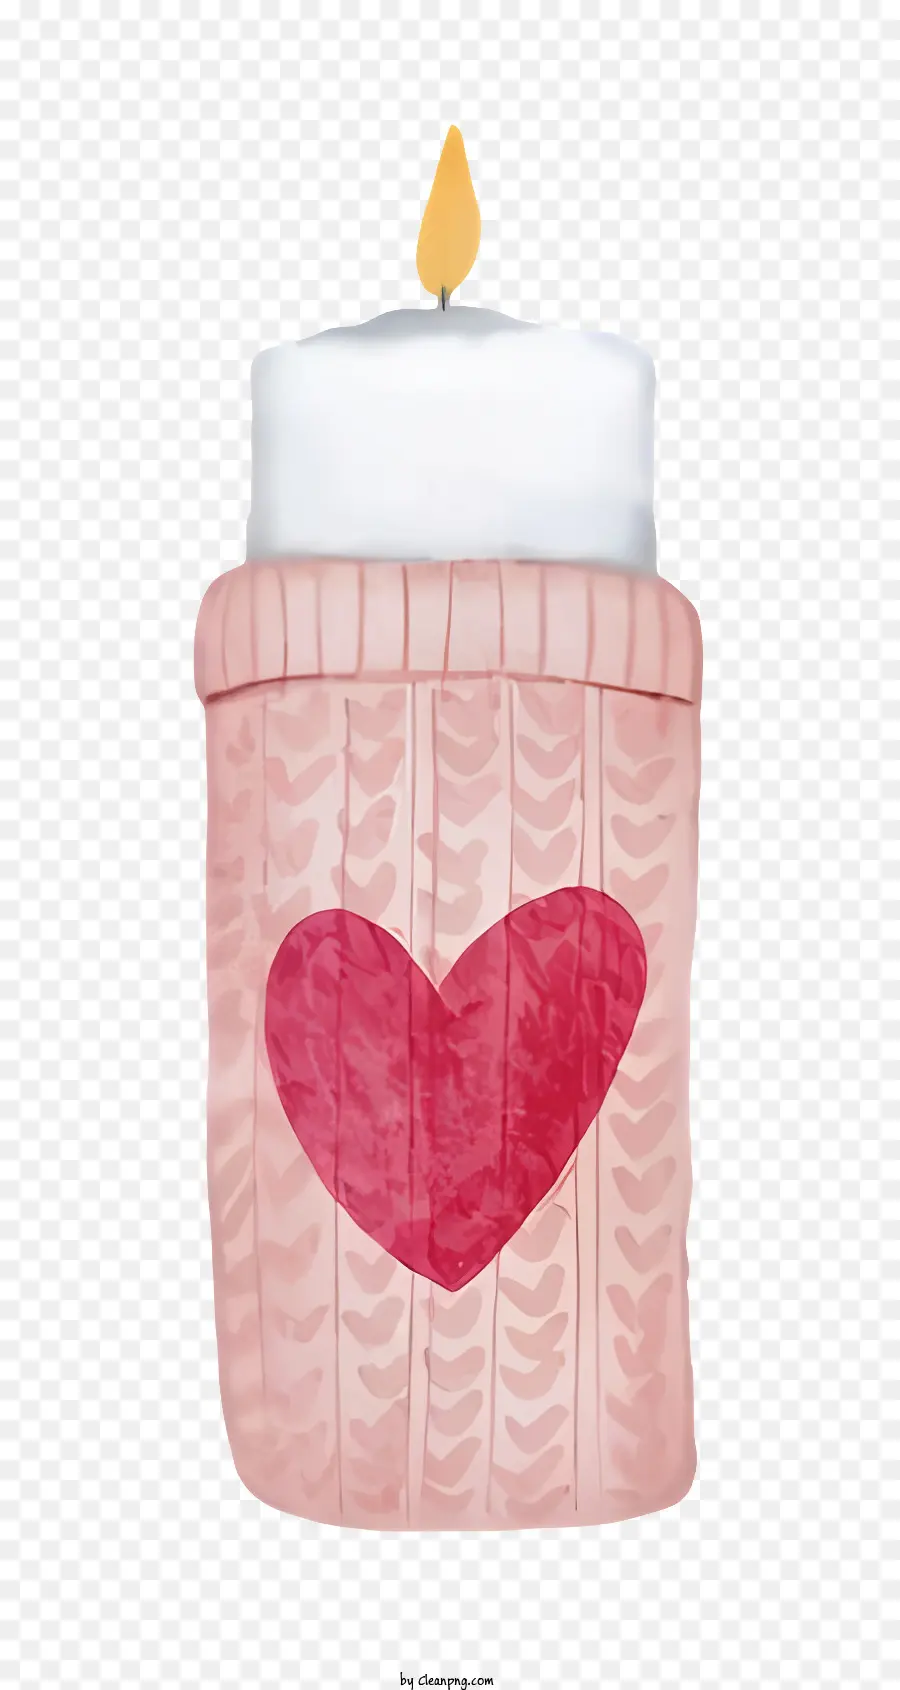 heart-shaped candle pink candle candle with wick wooden surface knitted pattern